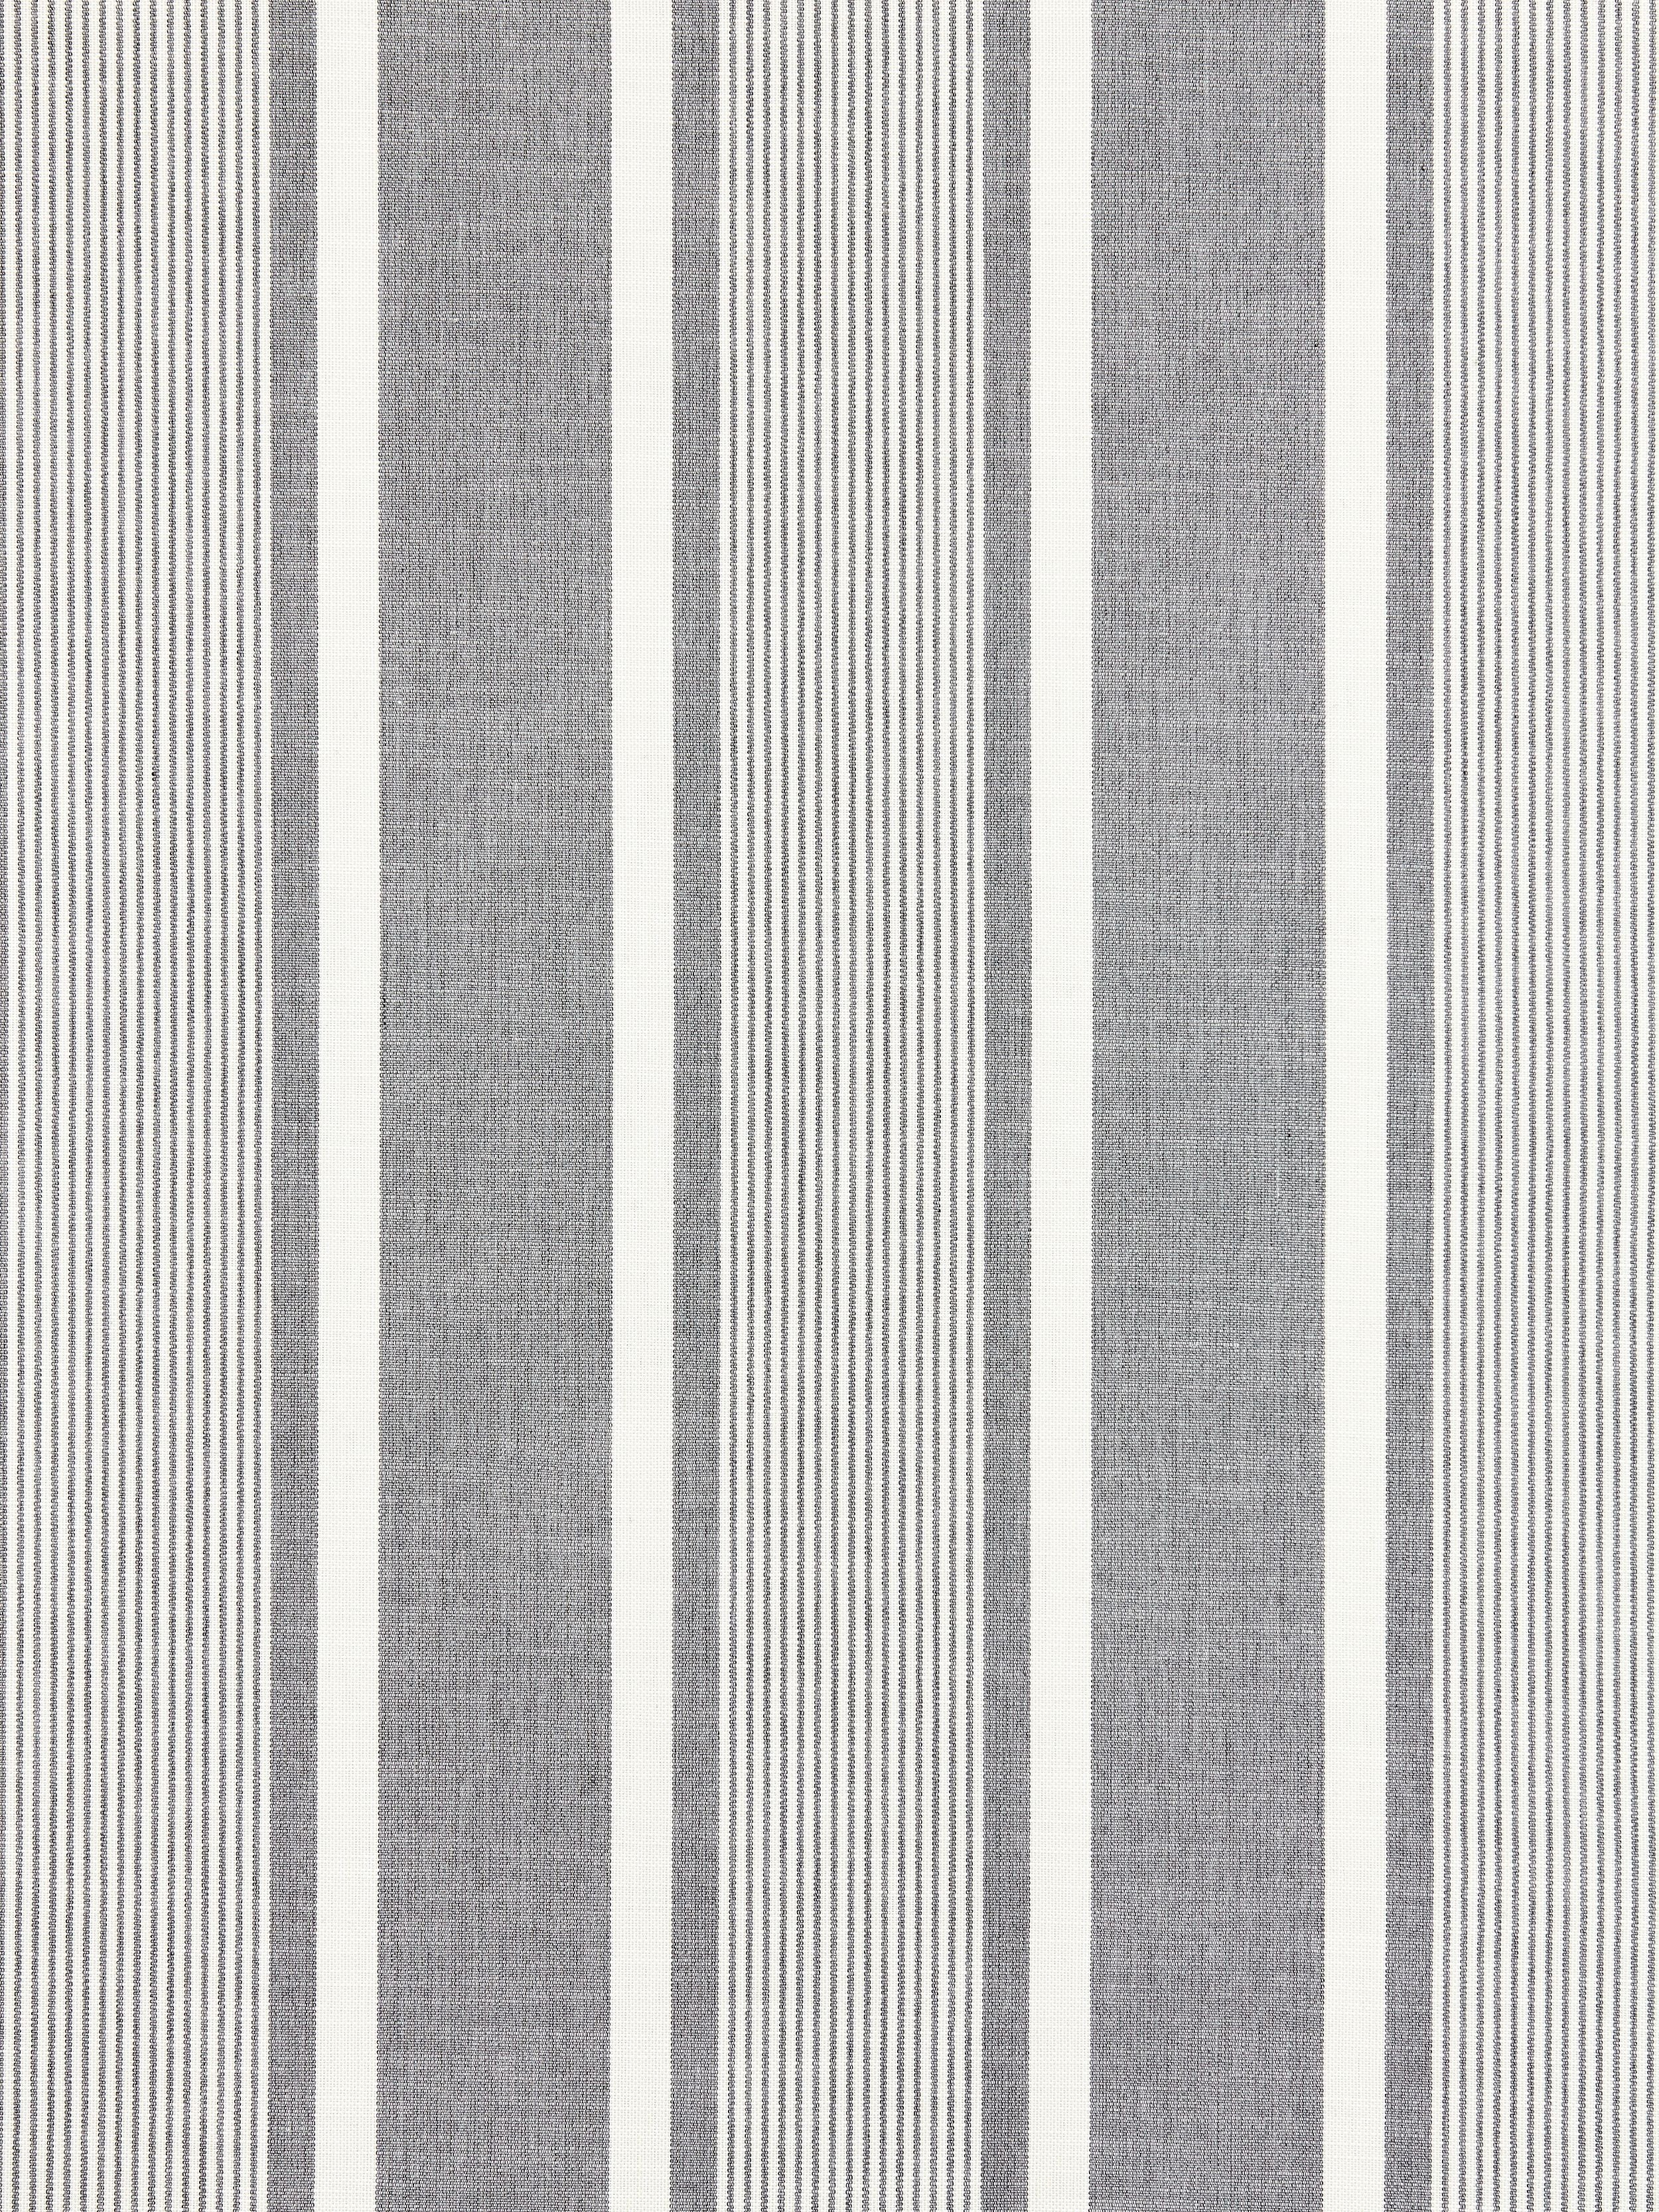 Wellfleet Stripe fabric in zinc color - pattern number SC 000227111 - by Scalamandre in the Scalamandre Fabrics Book 1 collection